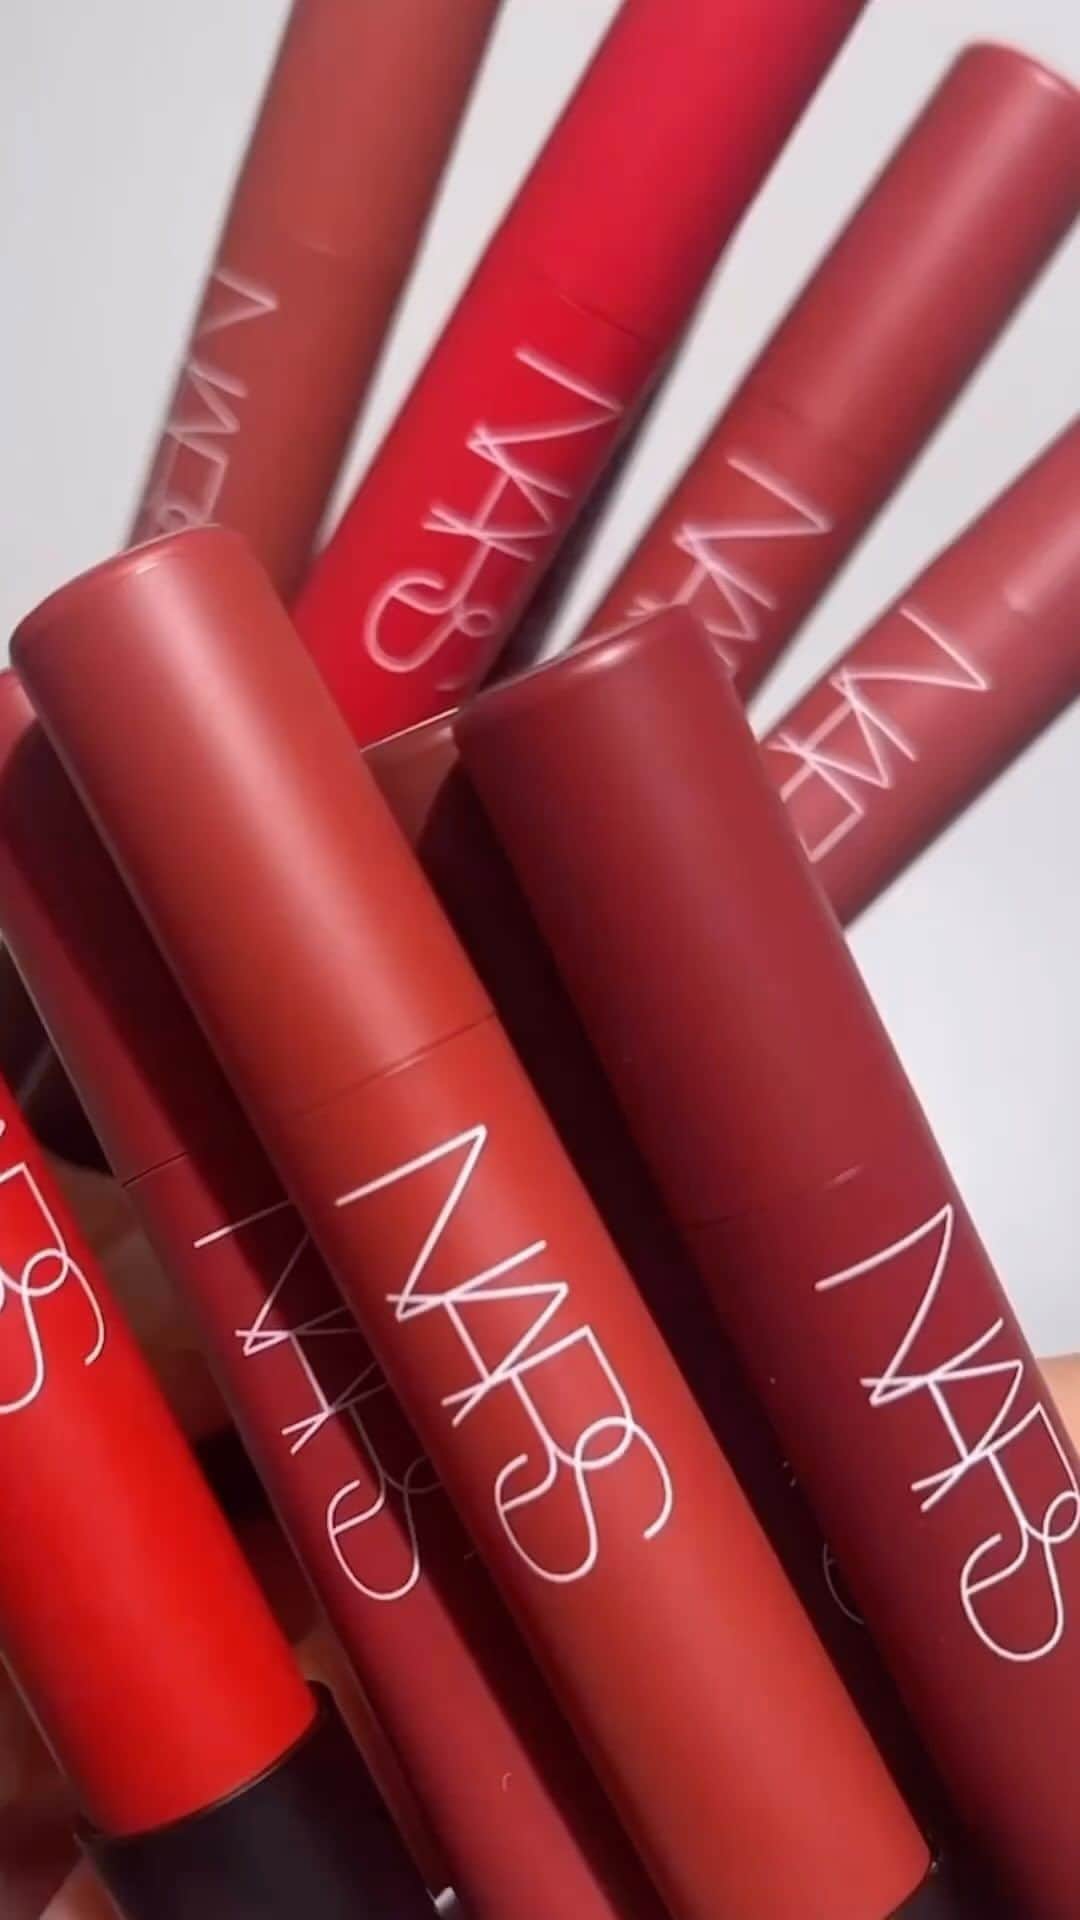 NARSのインスタグラム：「10 shades that last for 12 hours. Potency meets precision in Powermatte High-Intensity Lip Pencil, featuring a transformative cream-to-matte texture that glides on effortlessly with a bold, matte finish.  Shades featured: Cruella Bohemian Rhapsody  Born To Be Wild Endless Love Kiss Me Deadly Dragon Girl American Woman Dolce Vita Walkyrie Take Me Home」